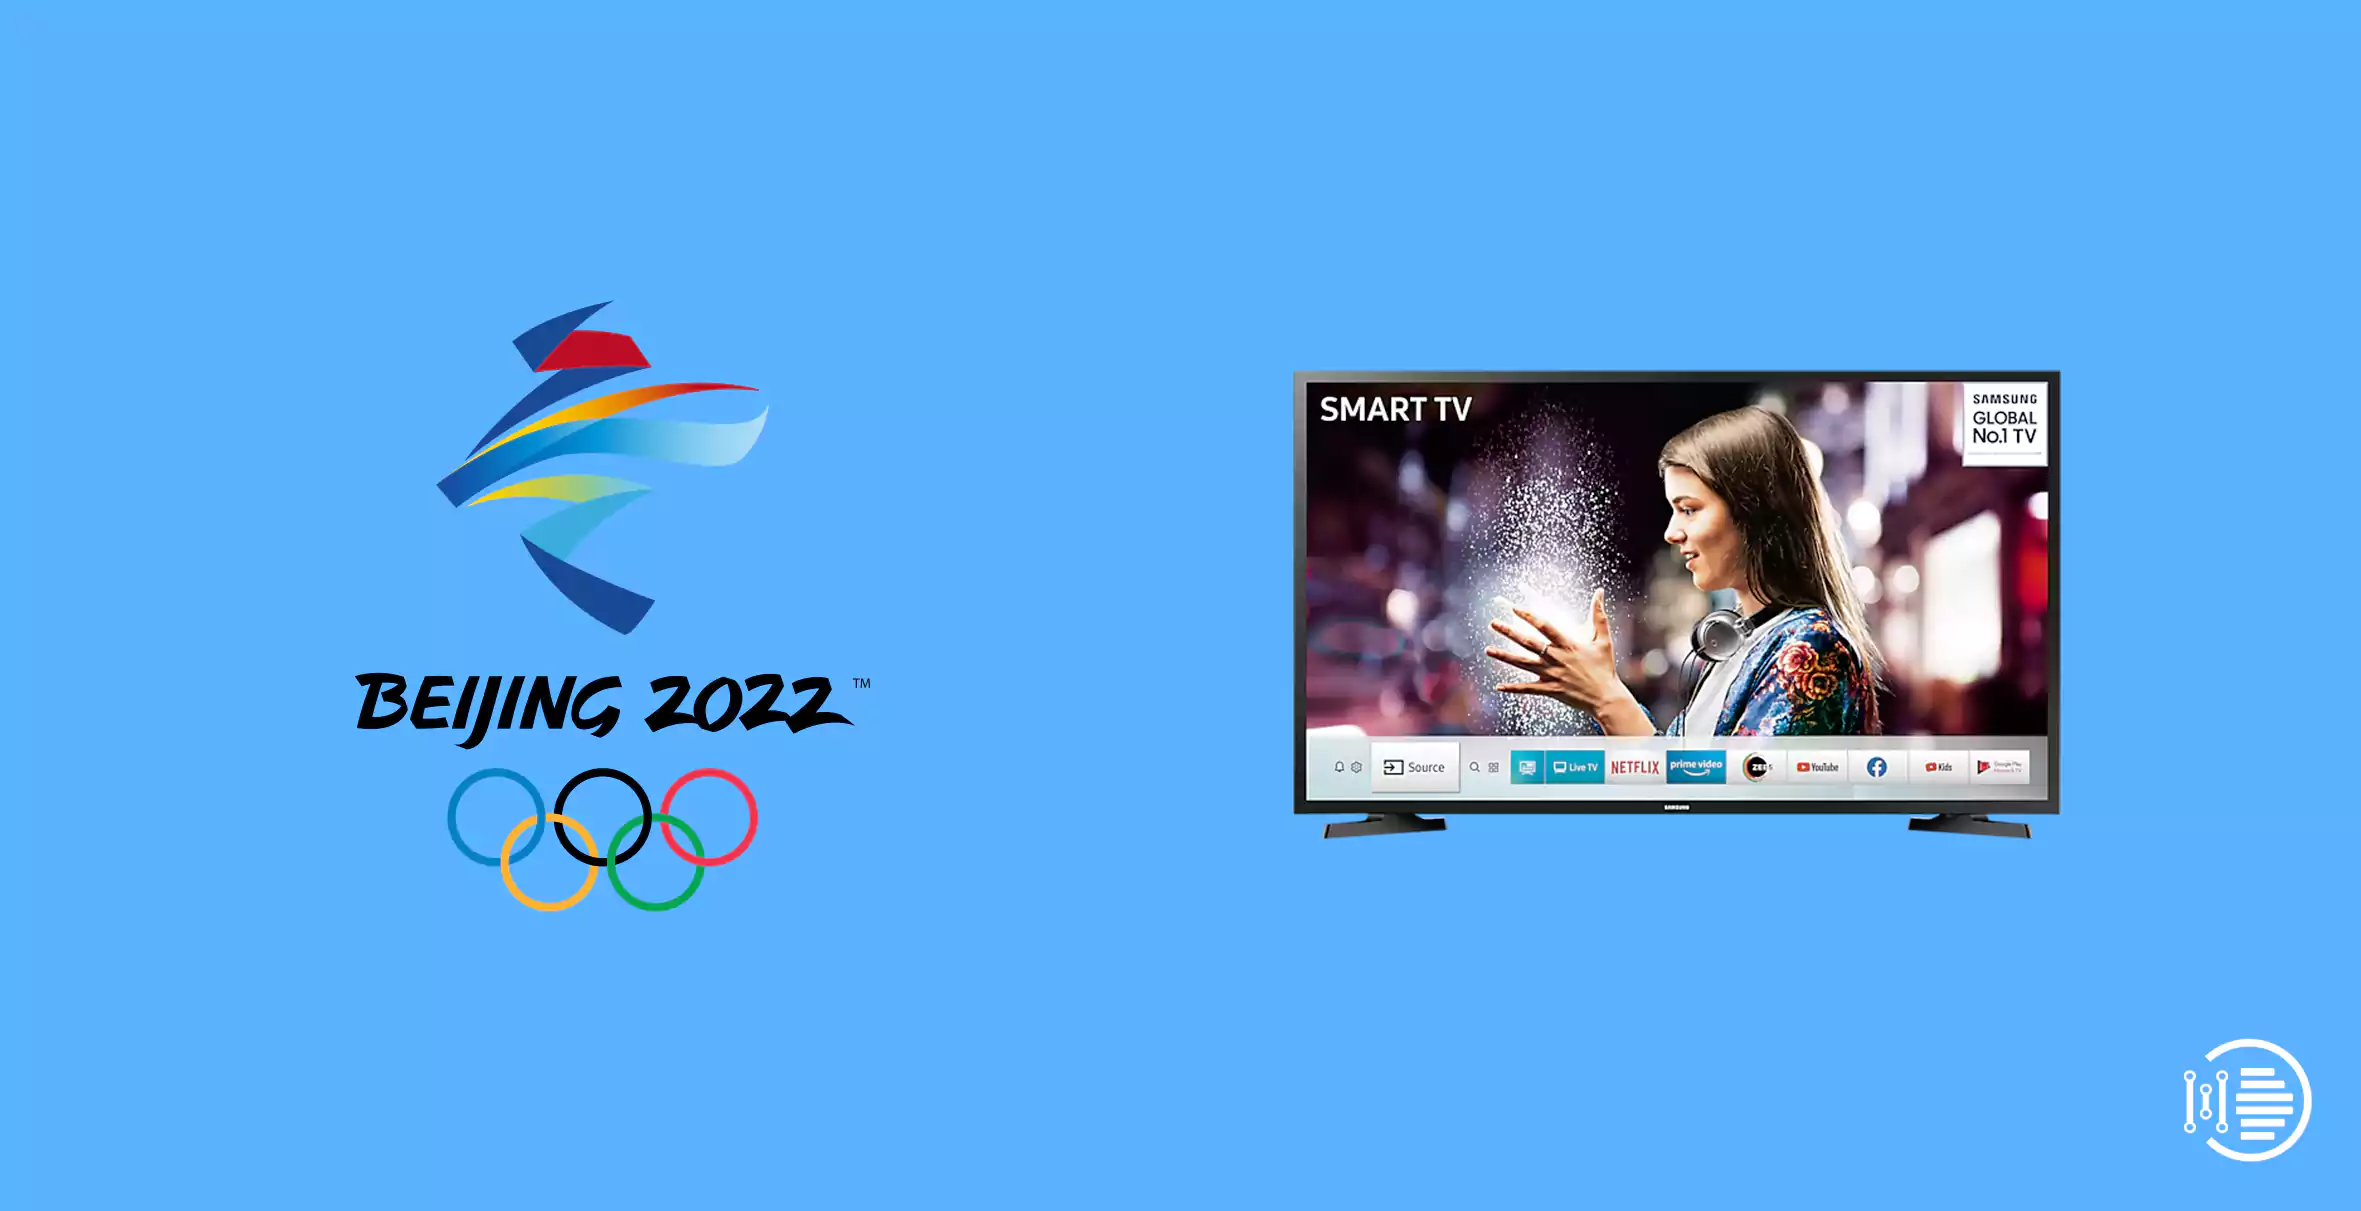 How to Watch Winter Olympics 2022 live on Samsung Smart TV